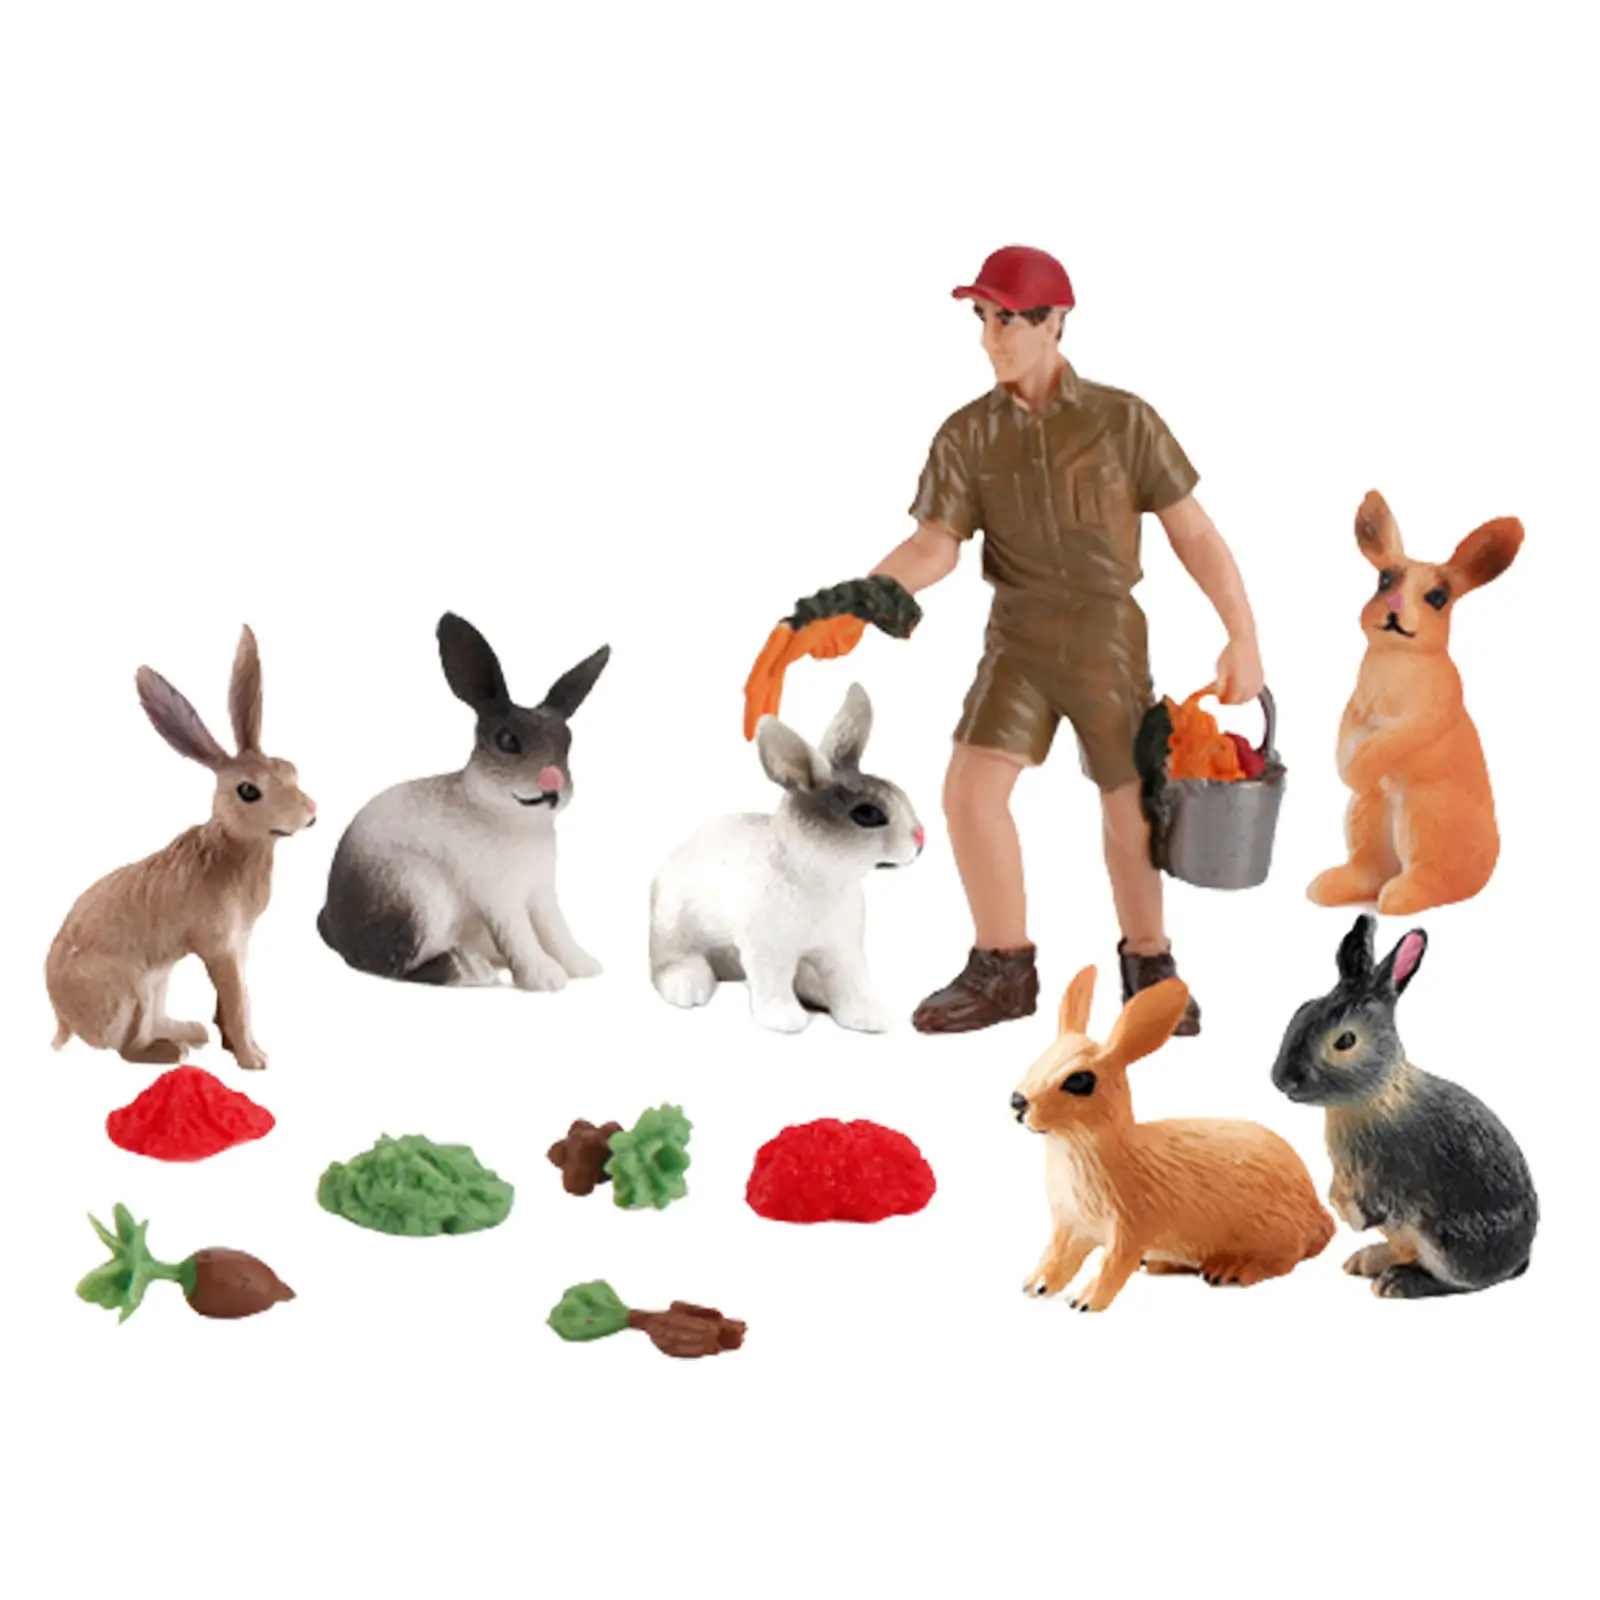 Plastic Action Figure Accessories Hand Painted Educational Toys for Kids